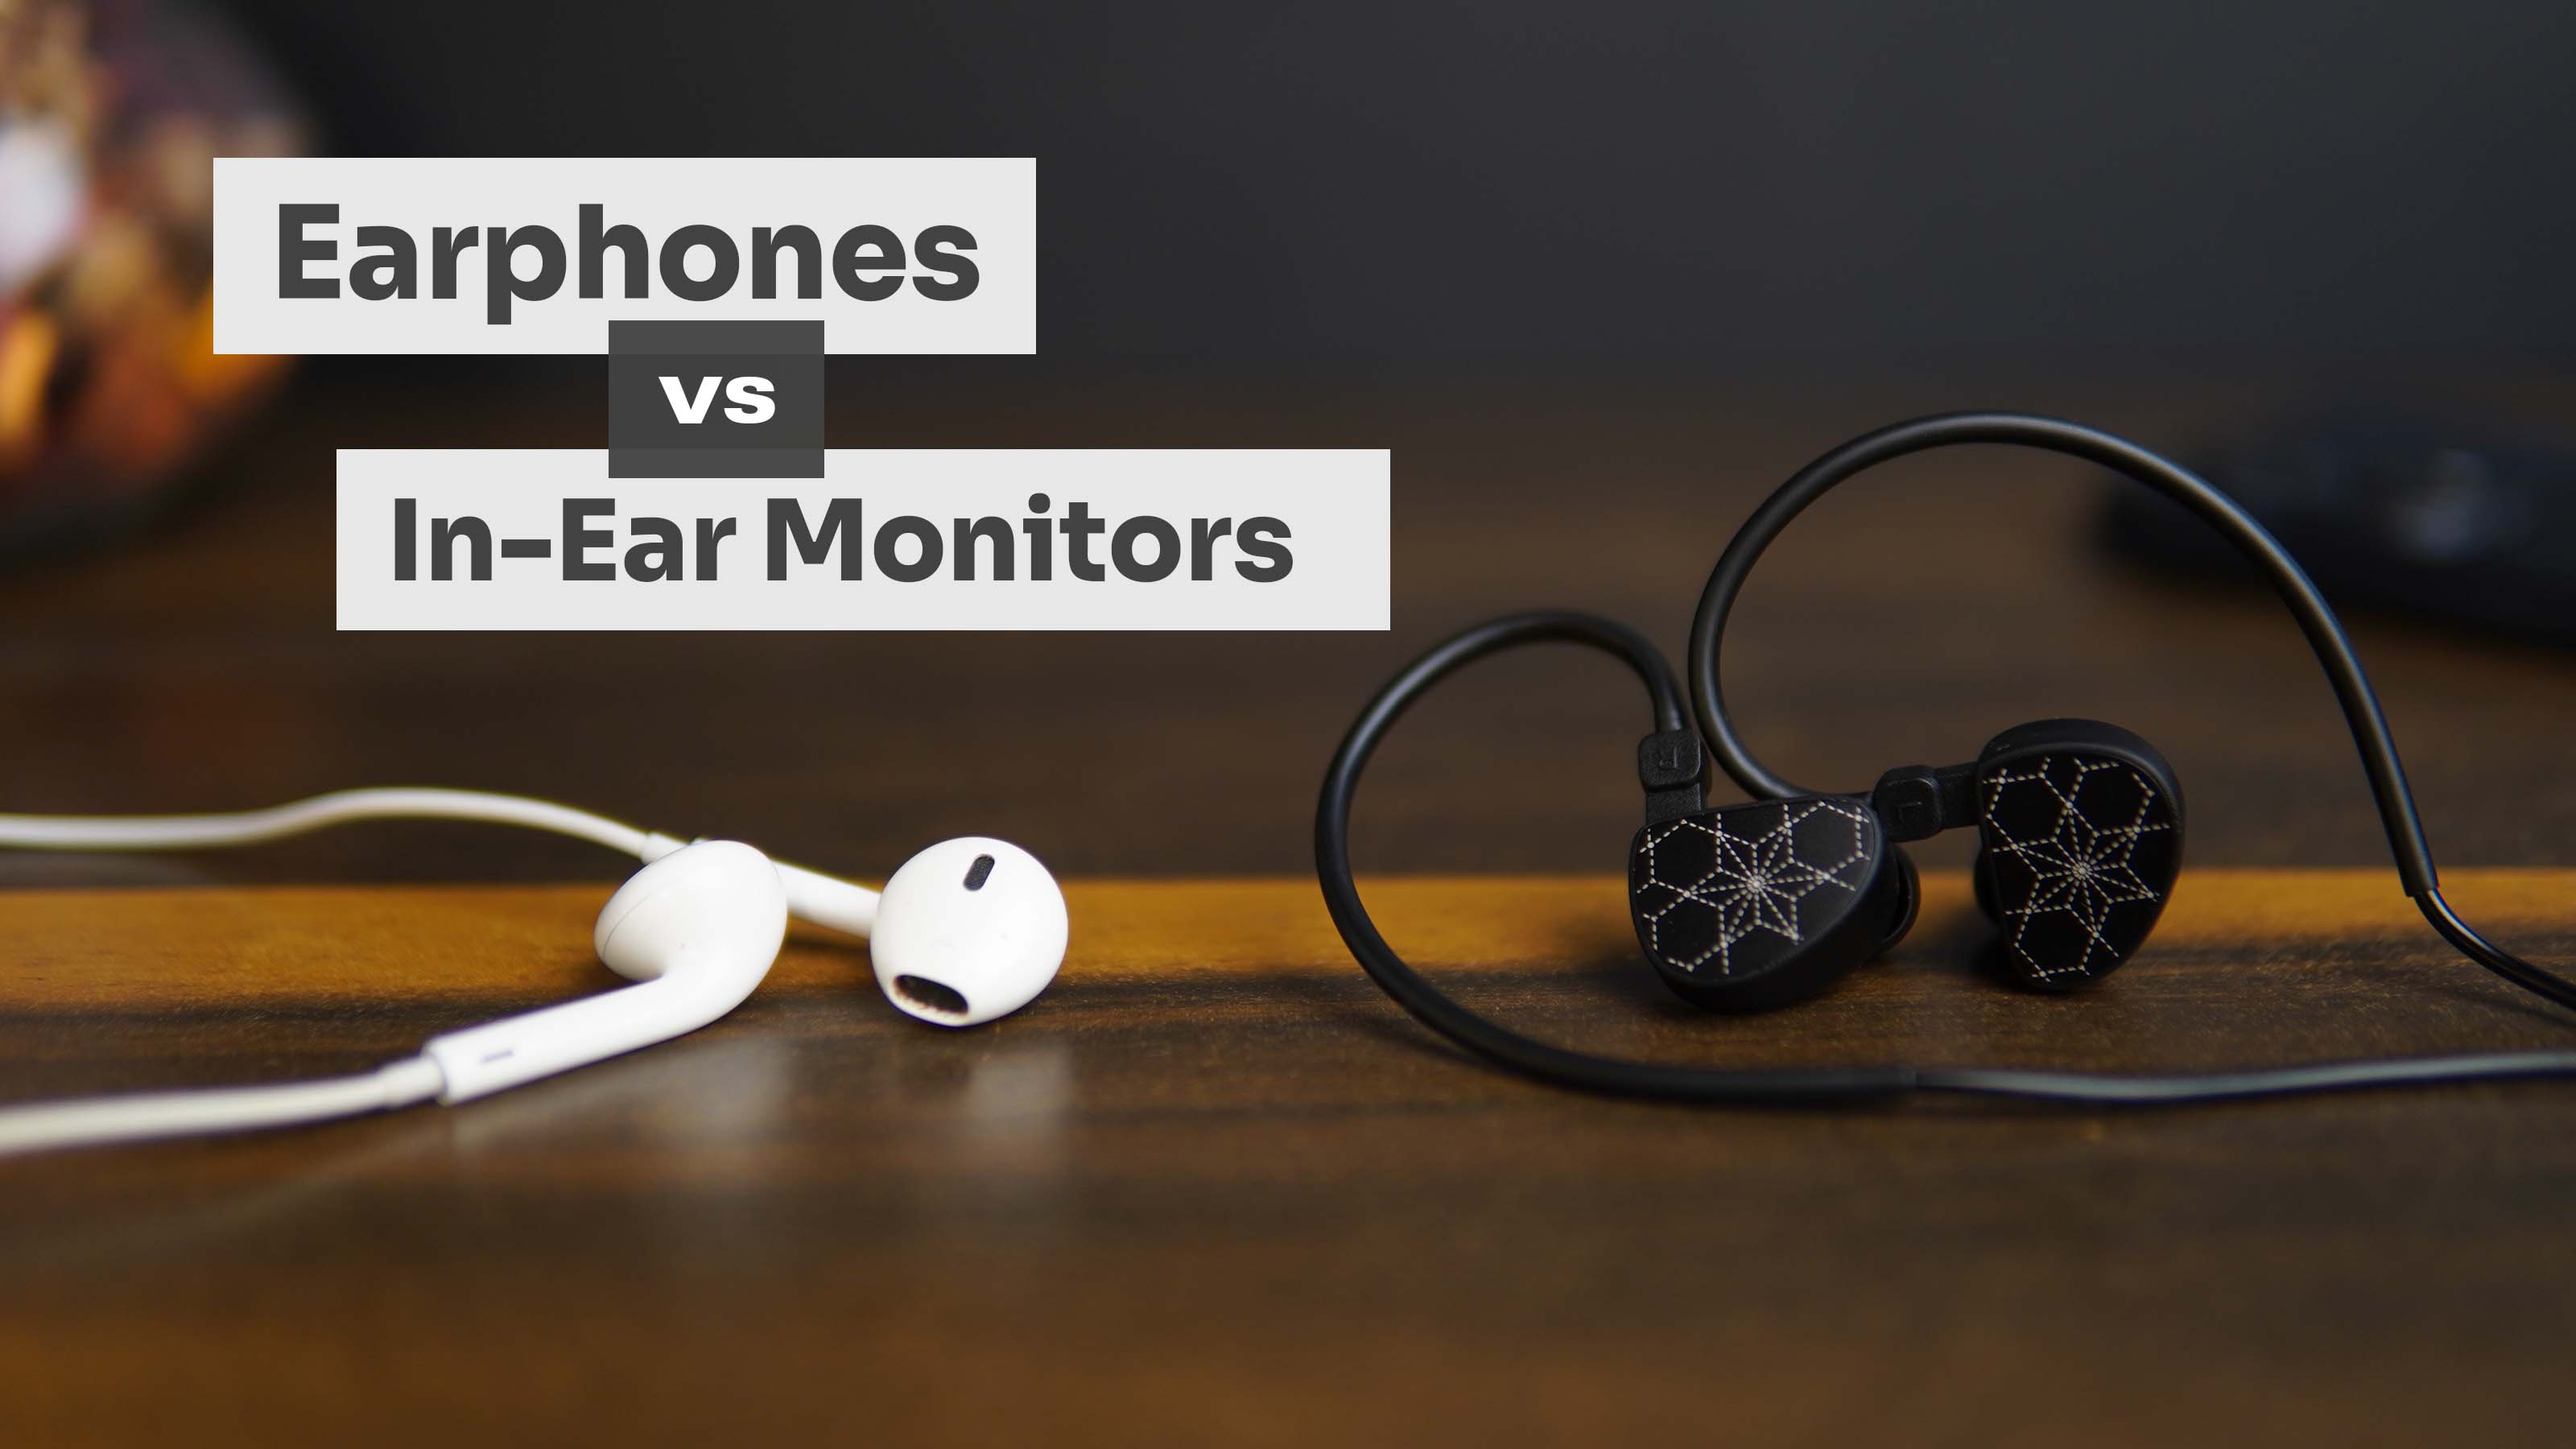 What are IEMs or In-Ears Monitors and how are they different from Earphones?